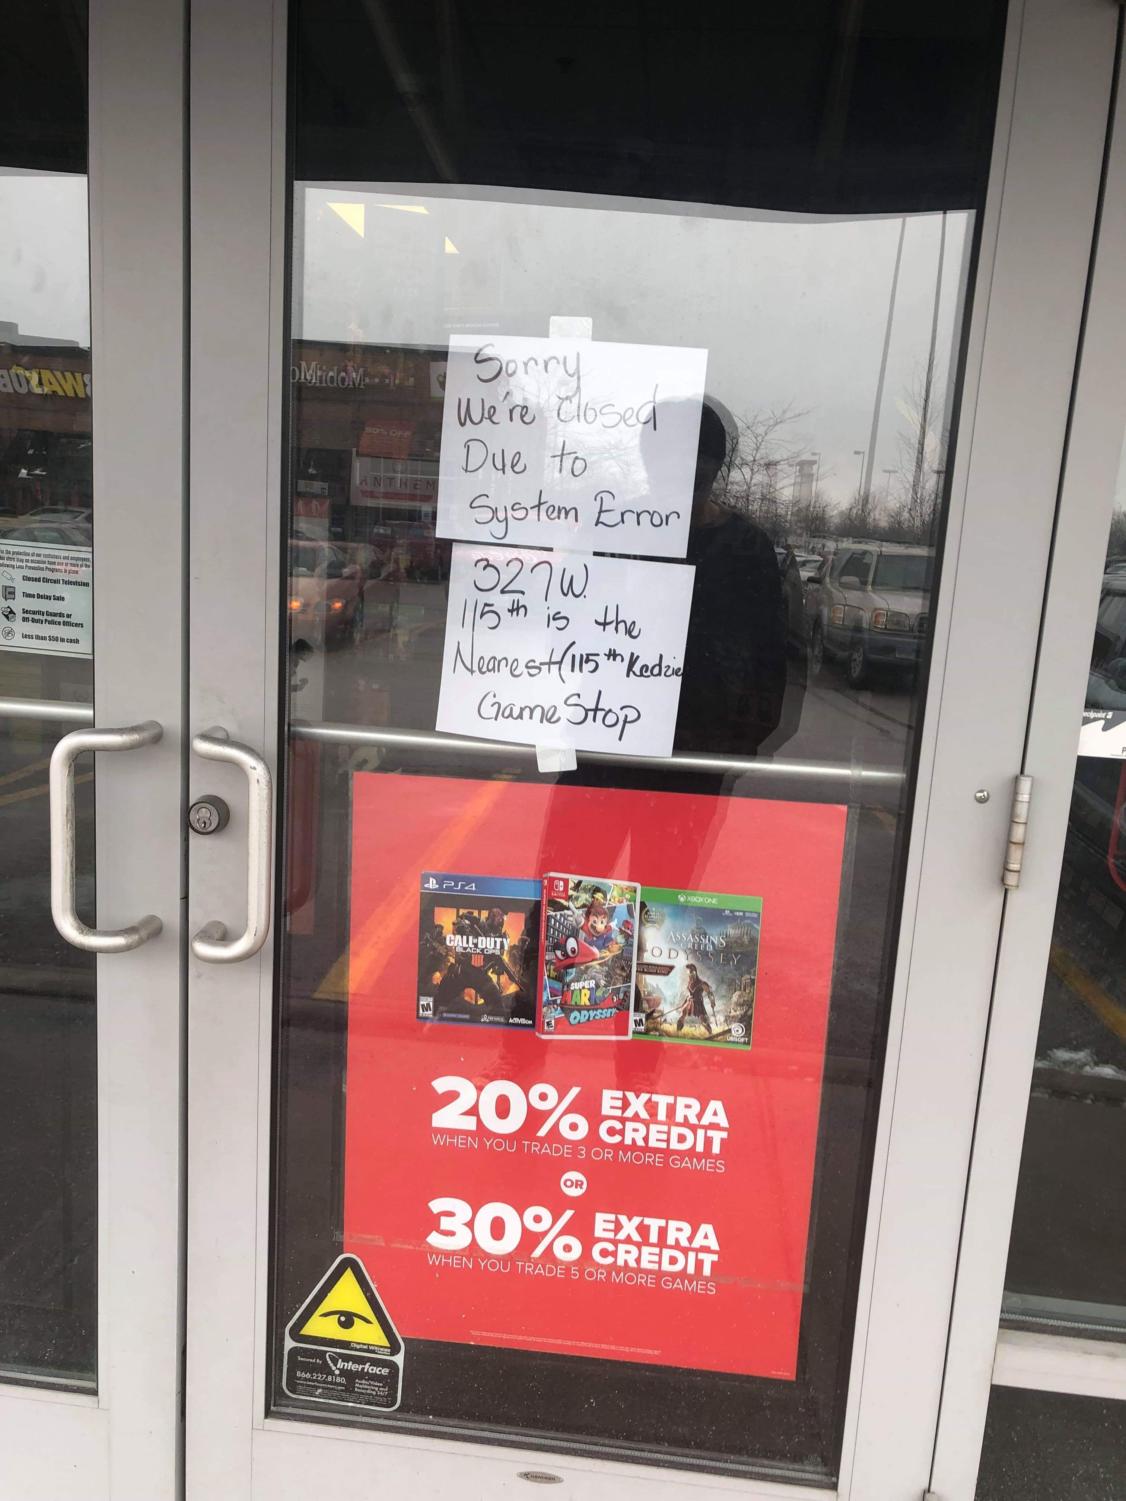 The GameStop at 1700 West 119th Street was robbed at 11:28 a.m. The store was still closed at 1:48 p.m. Officers were seen inside.